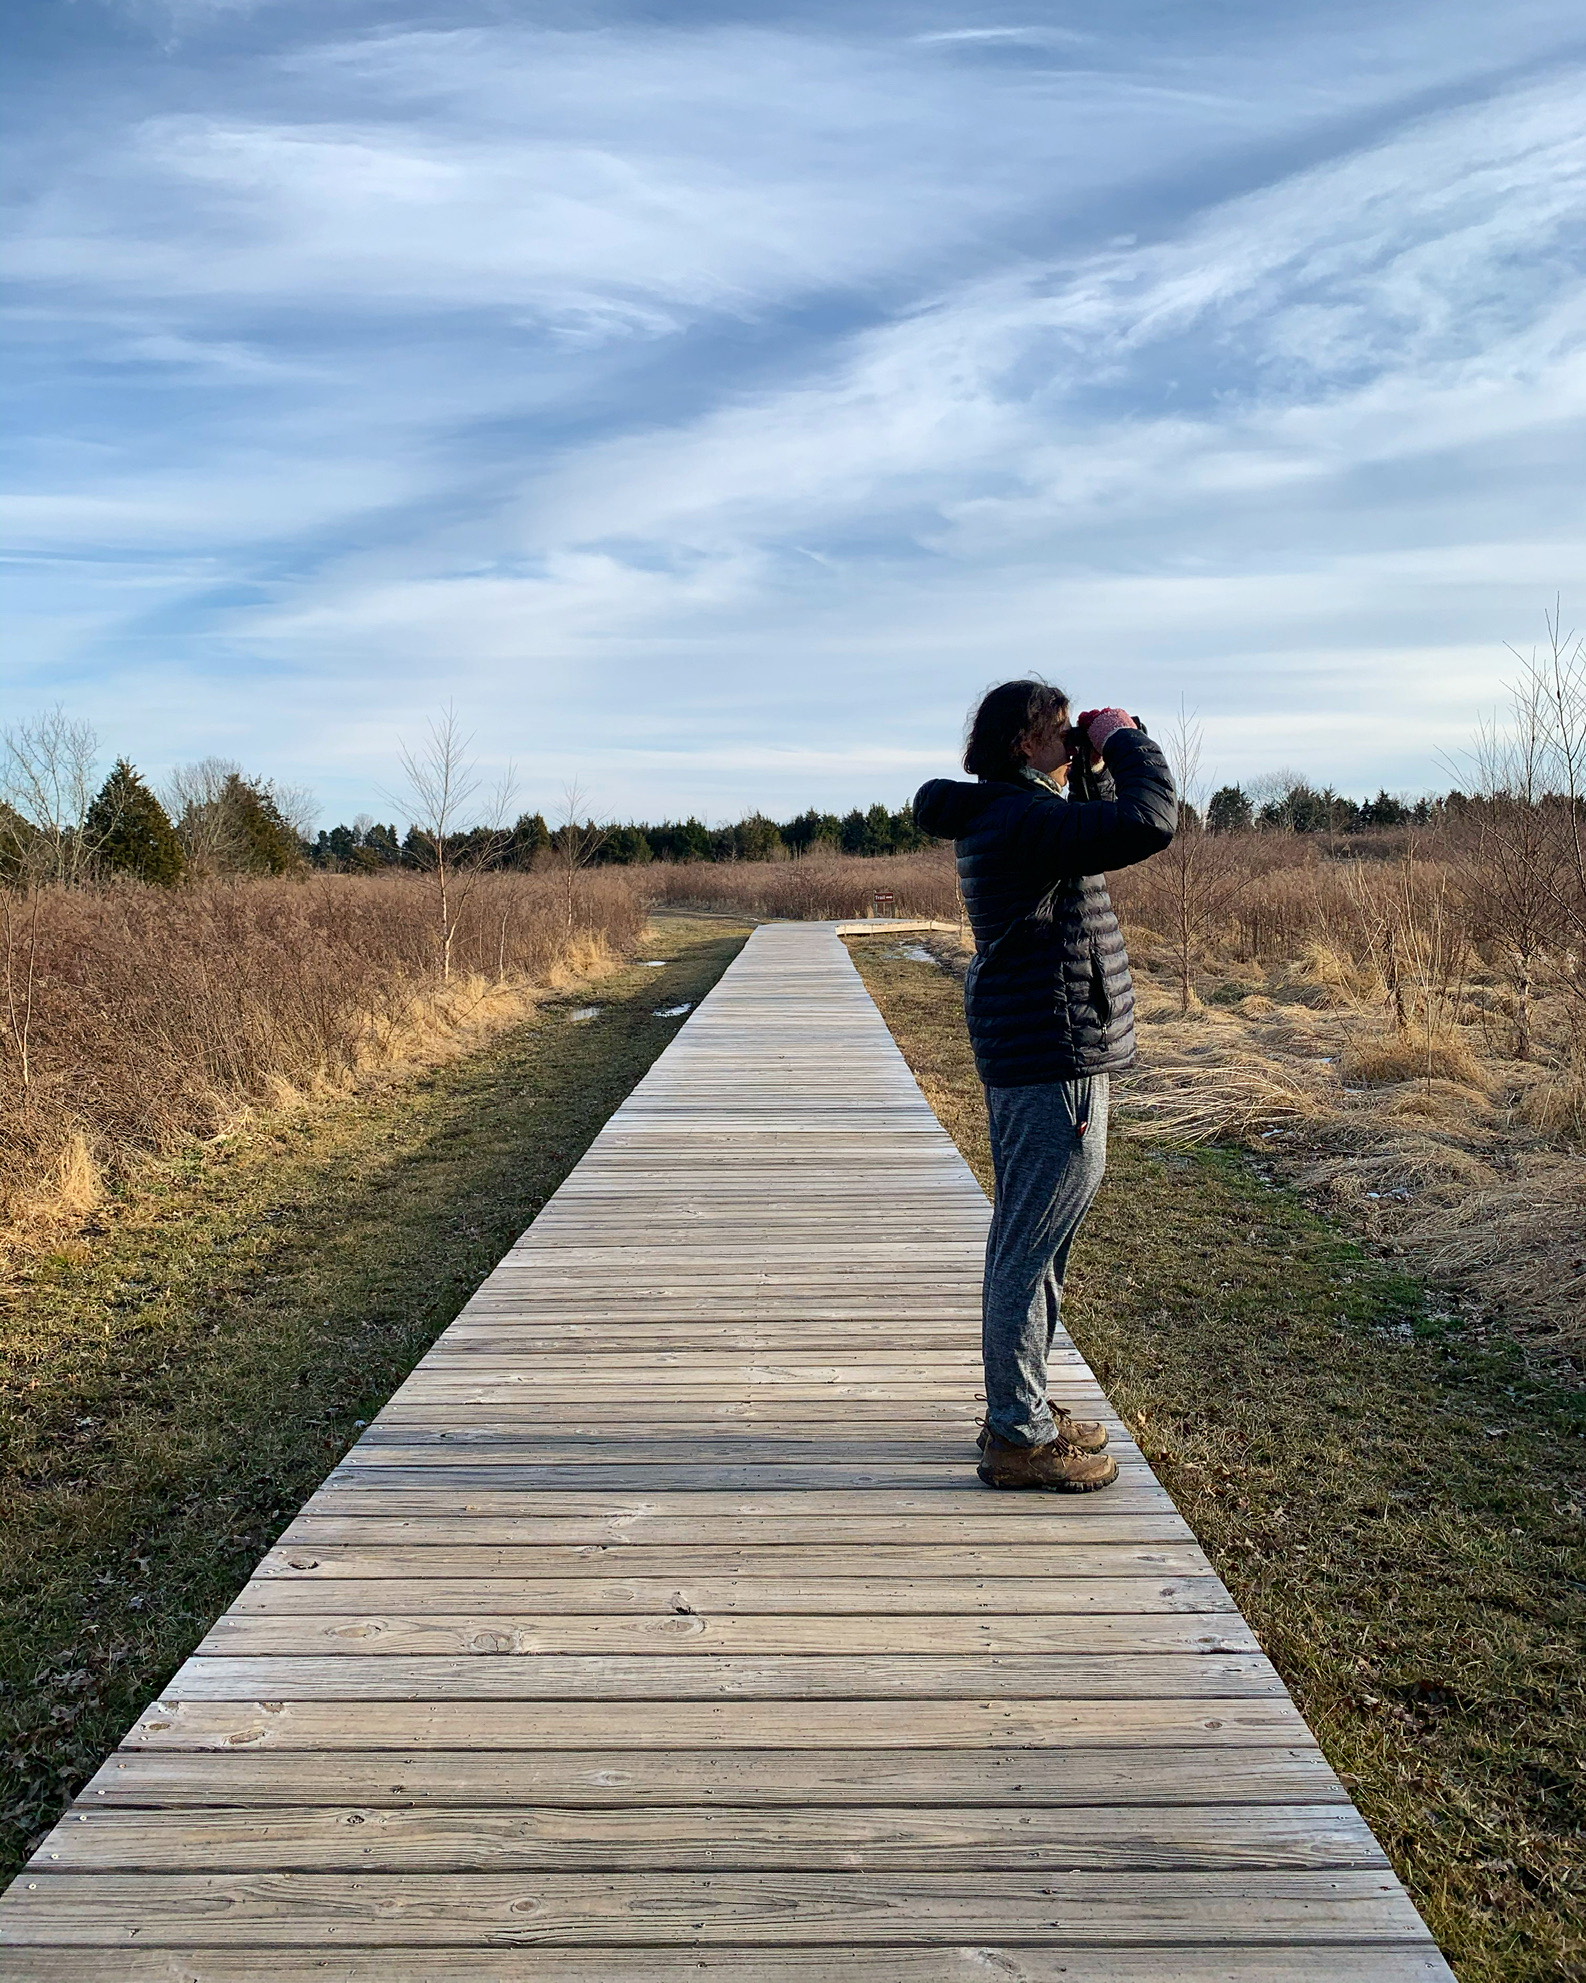 a person with binoculars looks off a wood trail platform